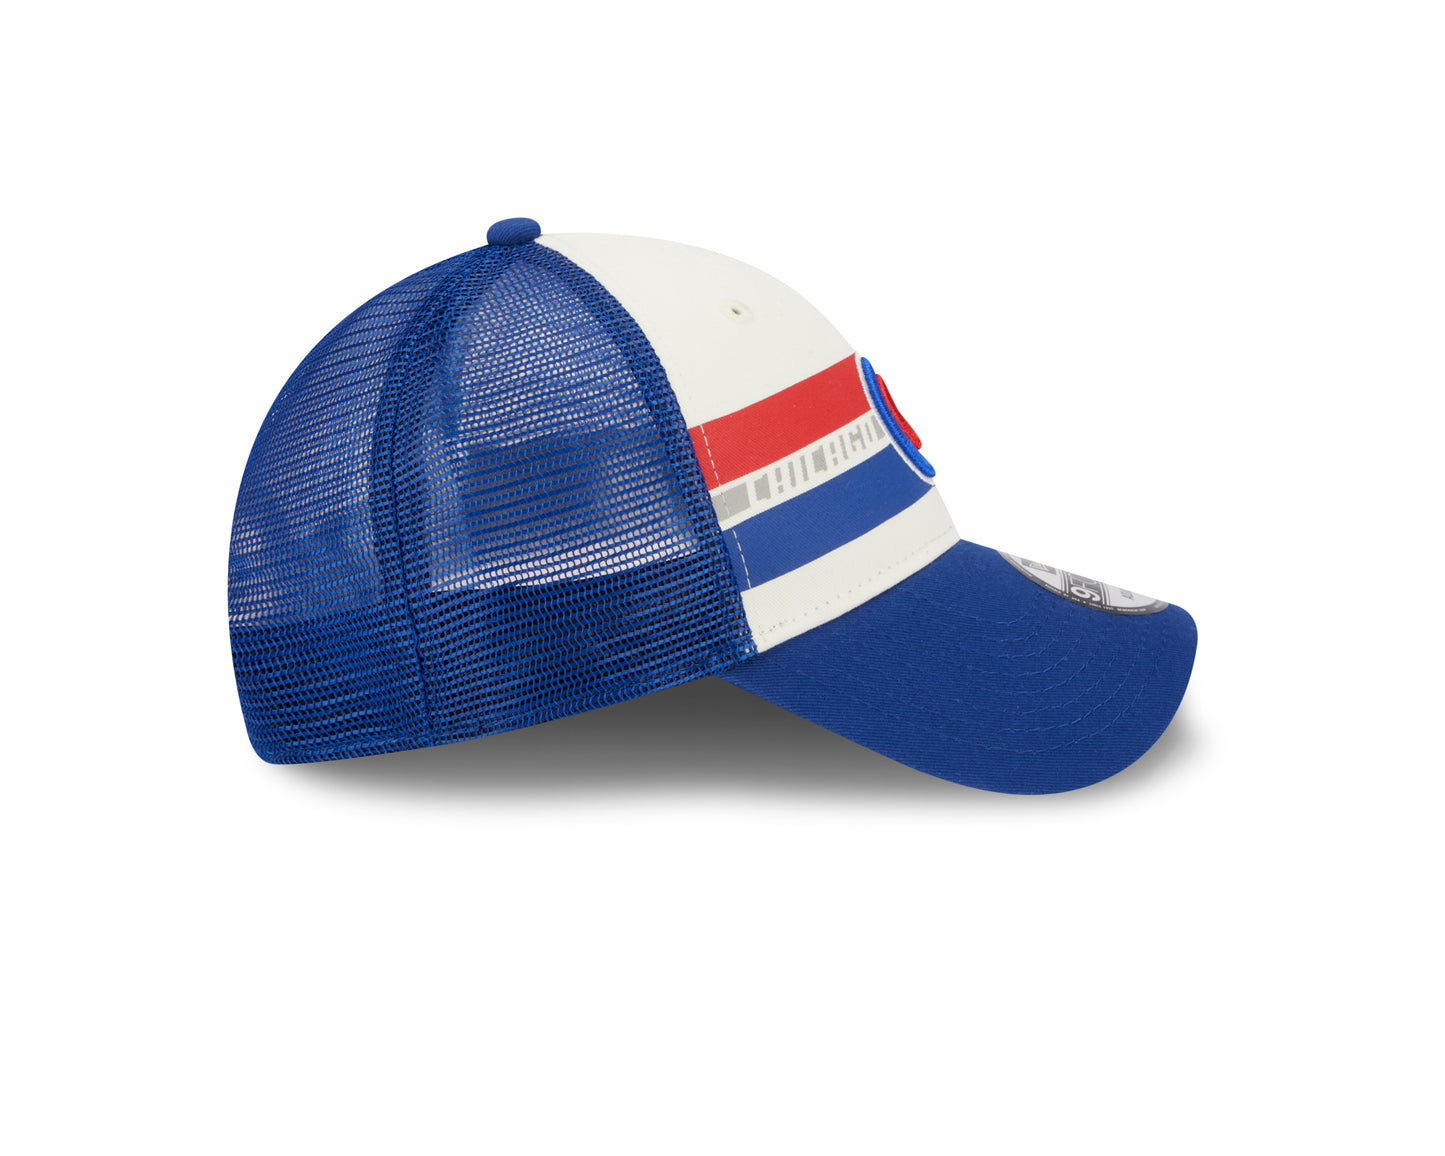 Chicago Cubs Cooperstown Collection Team Stripes New Era Trucker 9FORTY Adjustable Snapback Hat